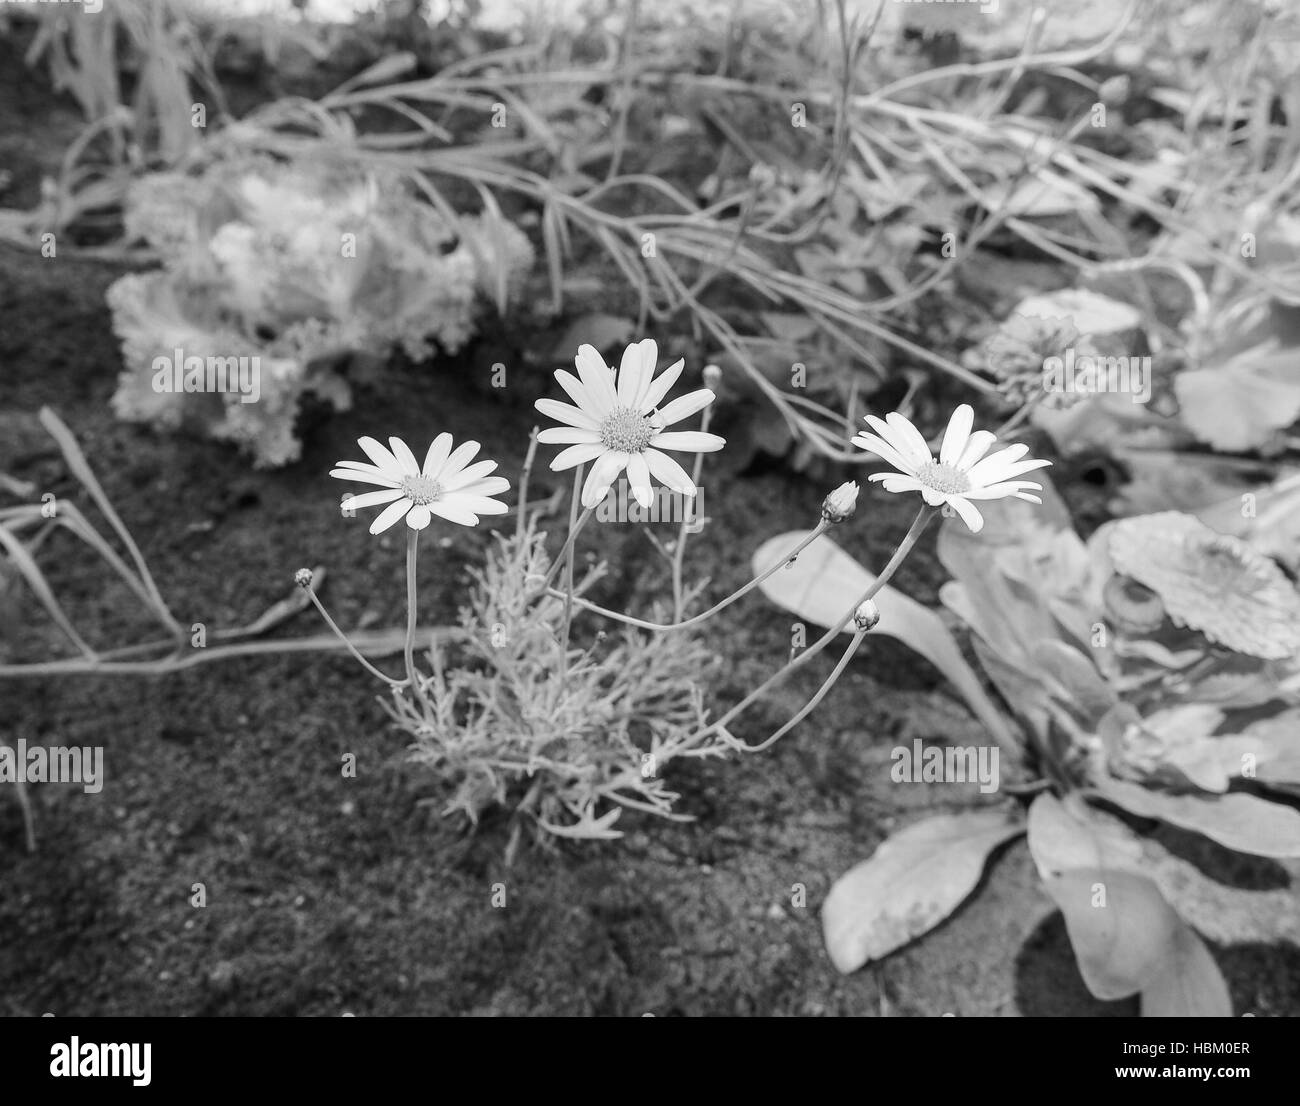 White Daisy flower in black and white Stock Photo